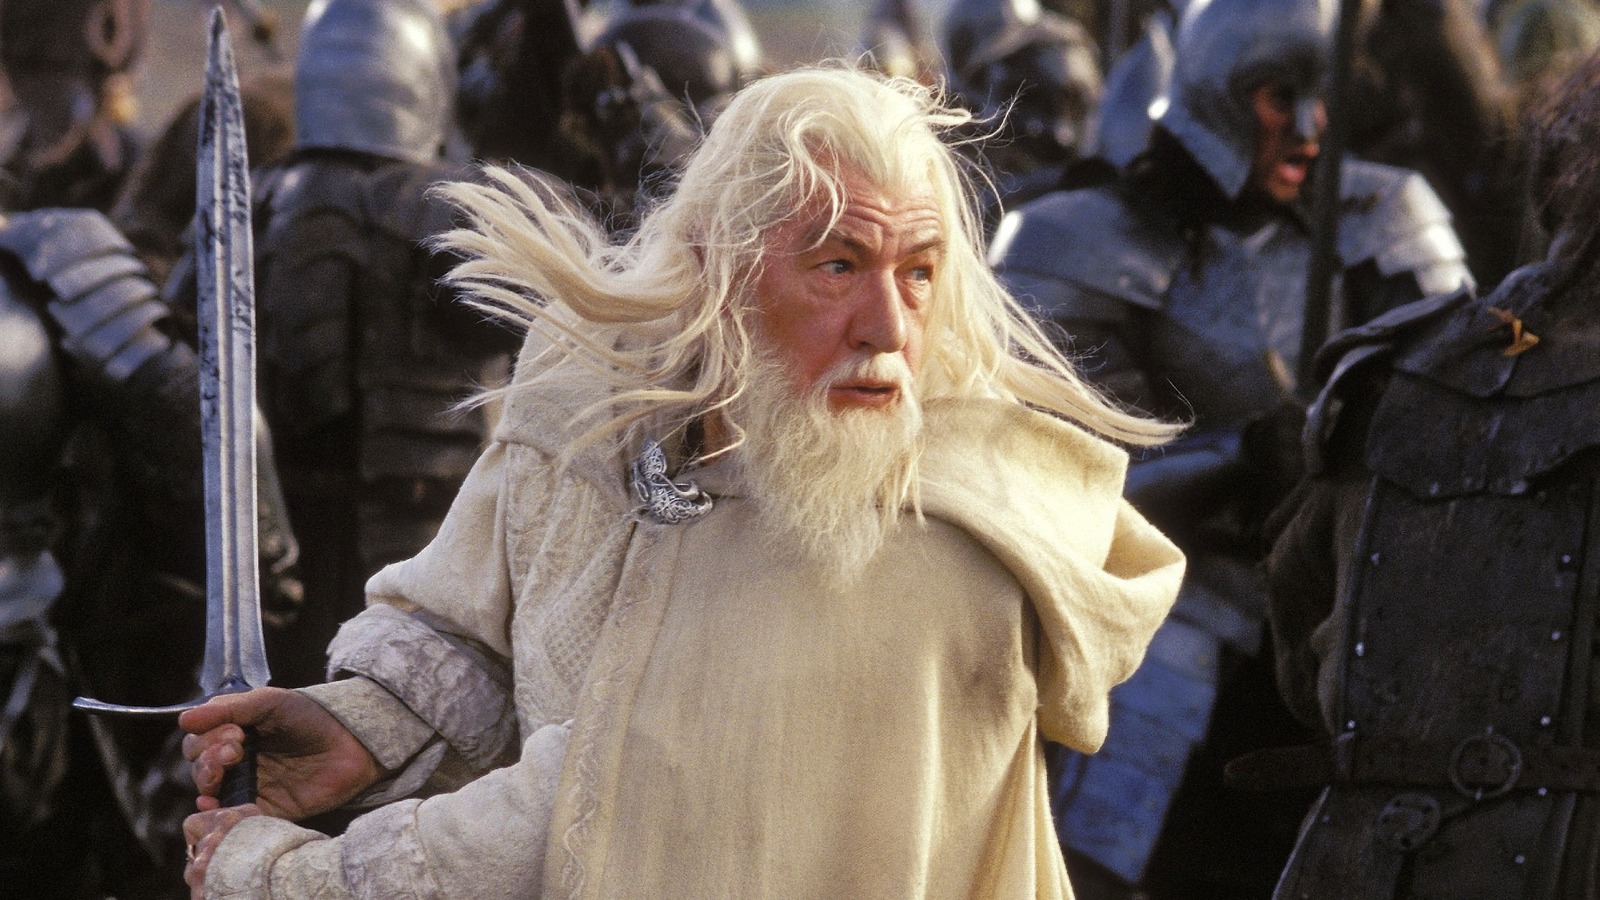 Lord Of The Rings fans are begging for Battle For Middle-earth remakes